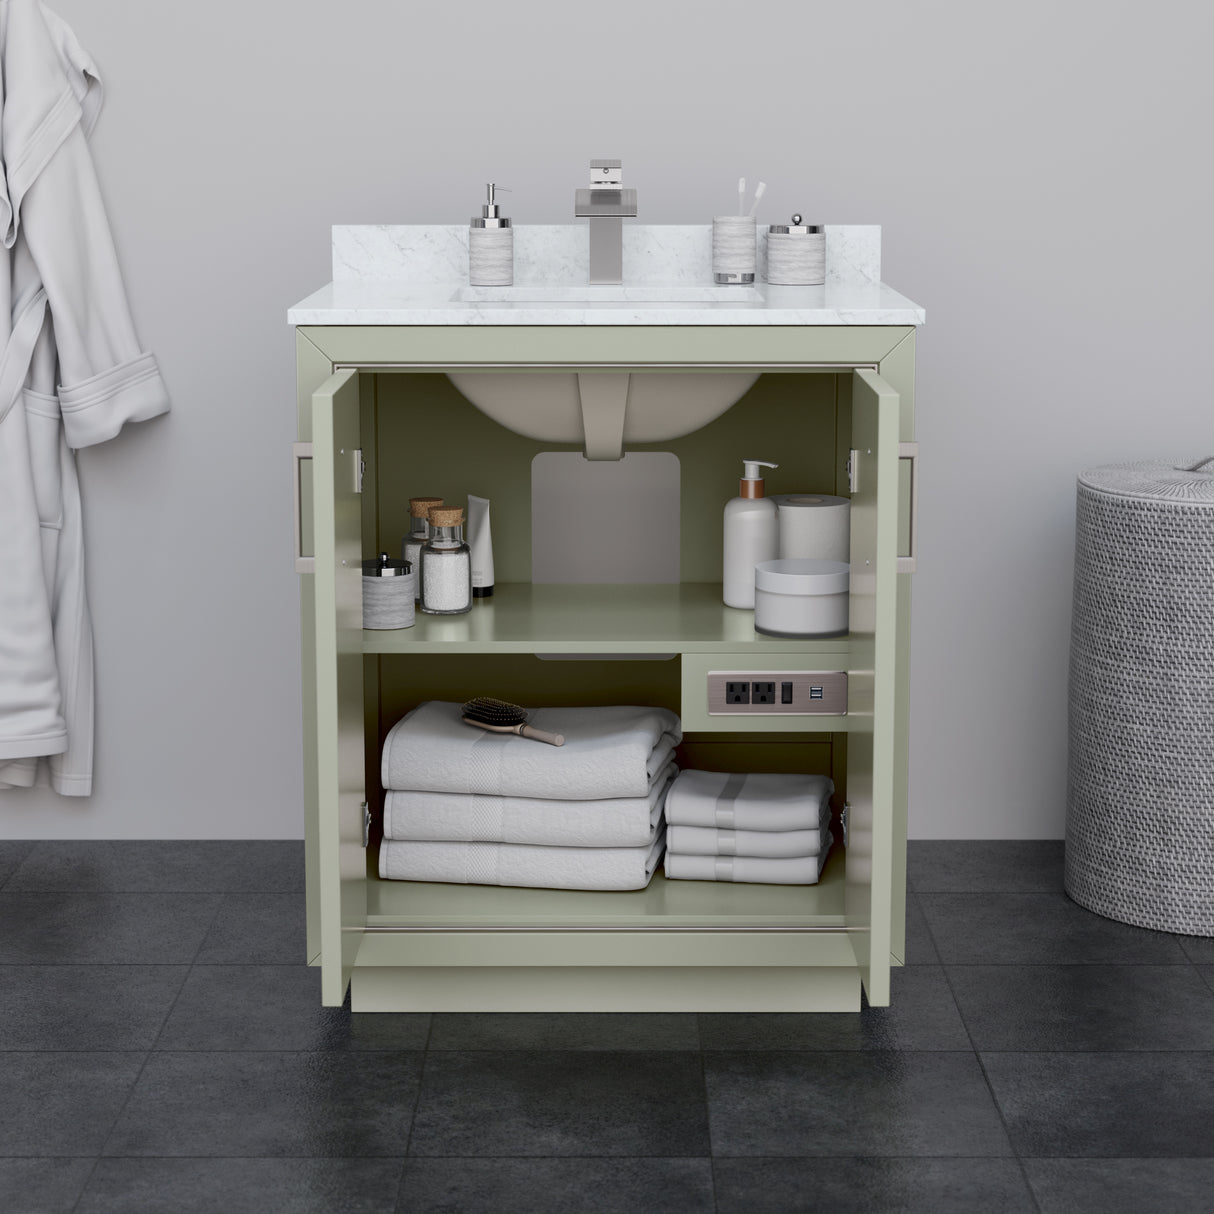 Icon 30 Inch Single Bathroom Vanity in Light Green White Carrara Marble Countertop Undermount Square Sink Brushed Nickel Trim